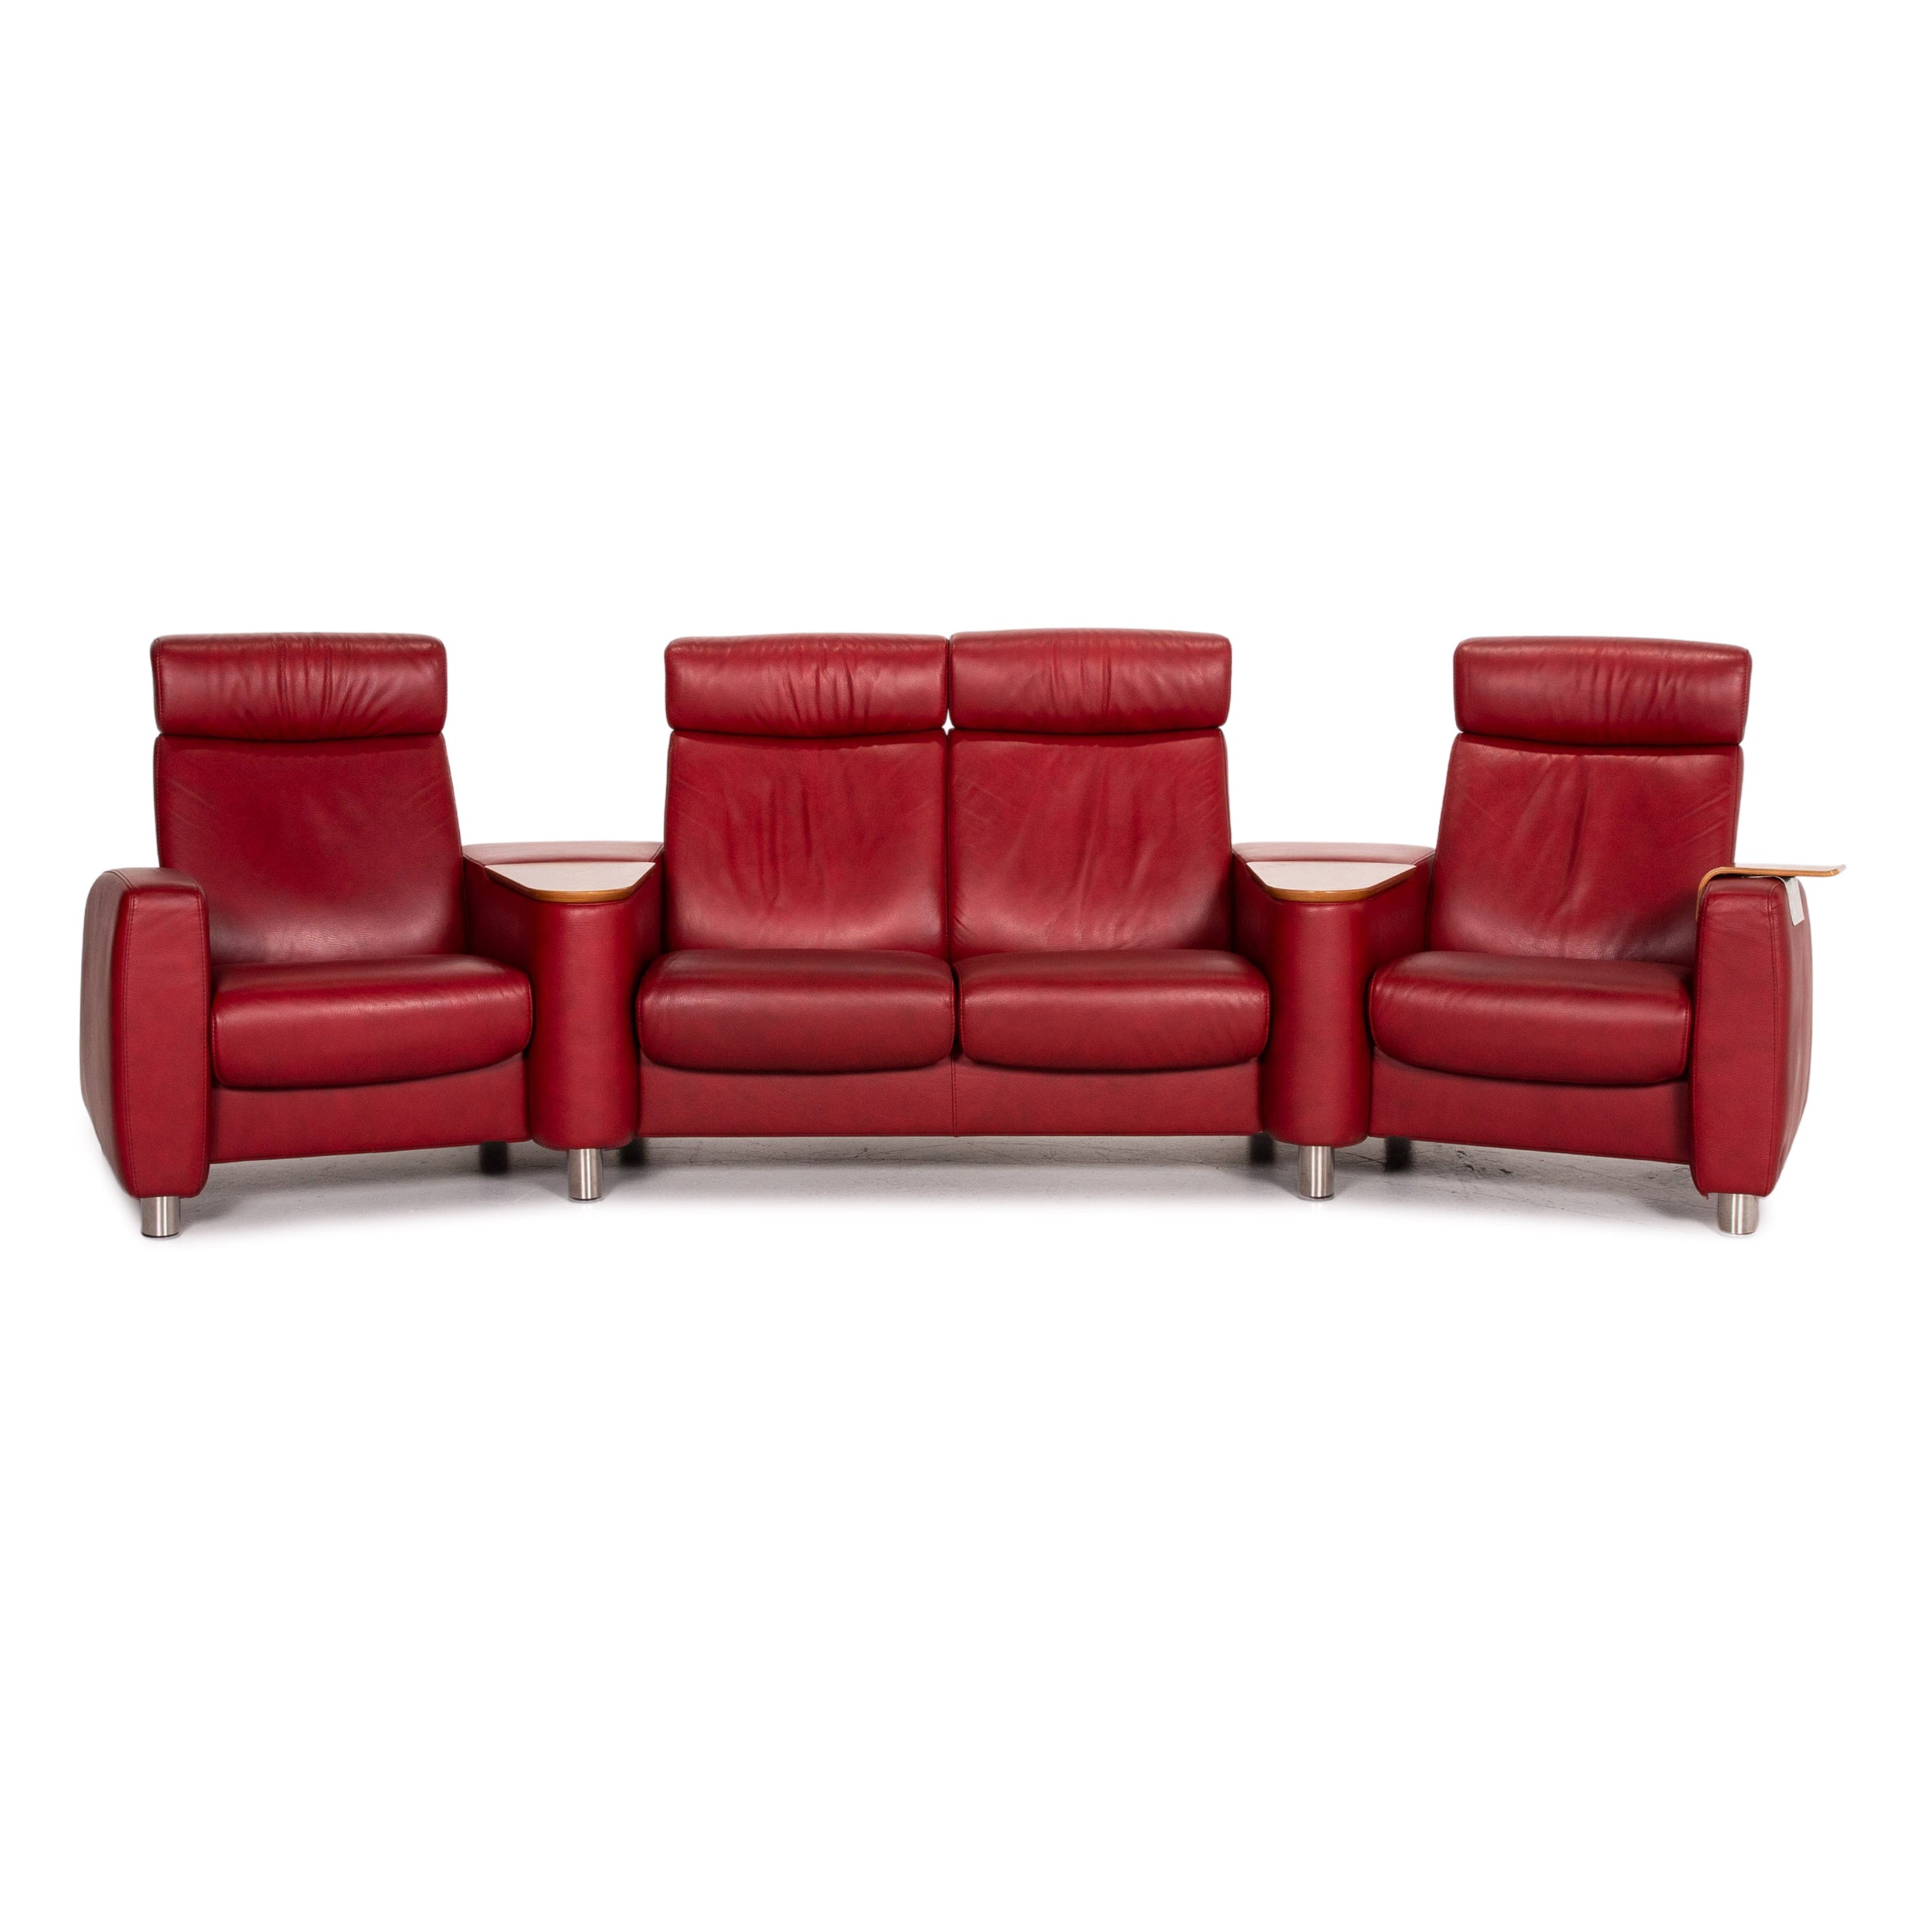 Stressless Arion Leder Sofa Rot Viersitzer Heimkino Relaxfunktion Funktion Couch #14524